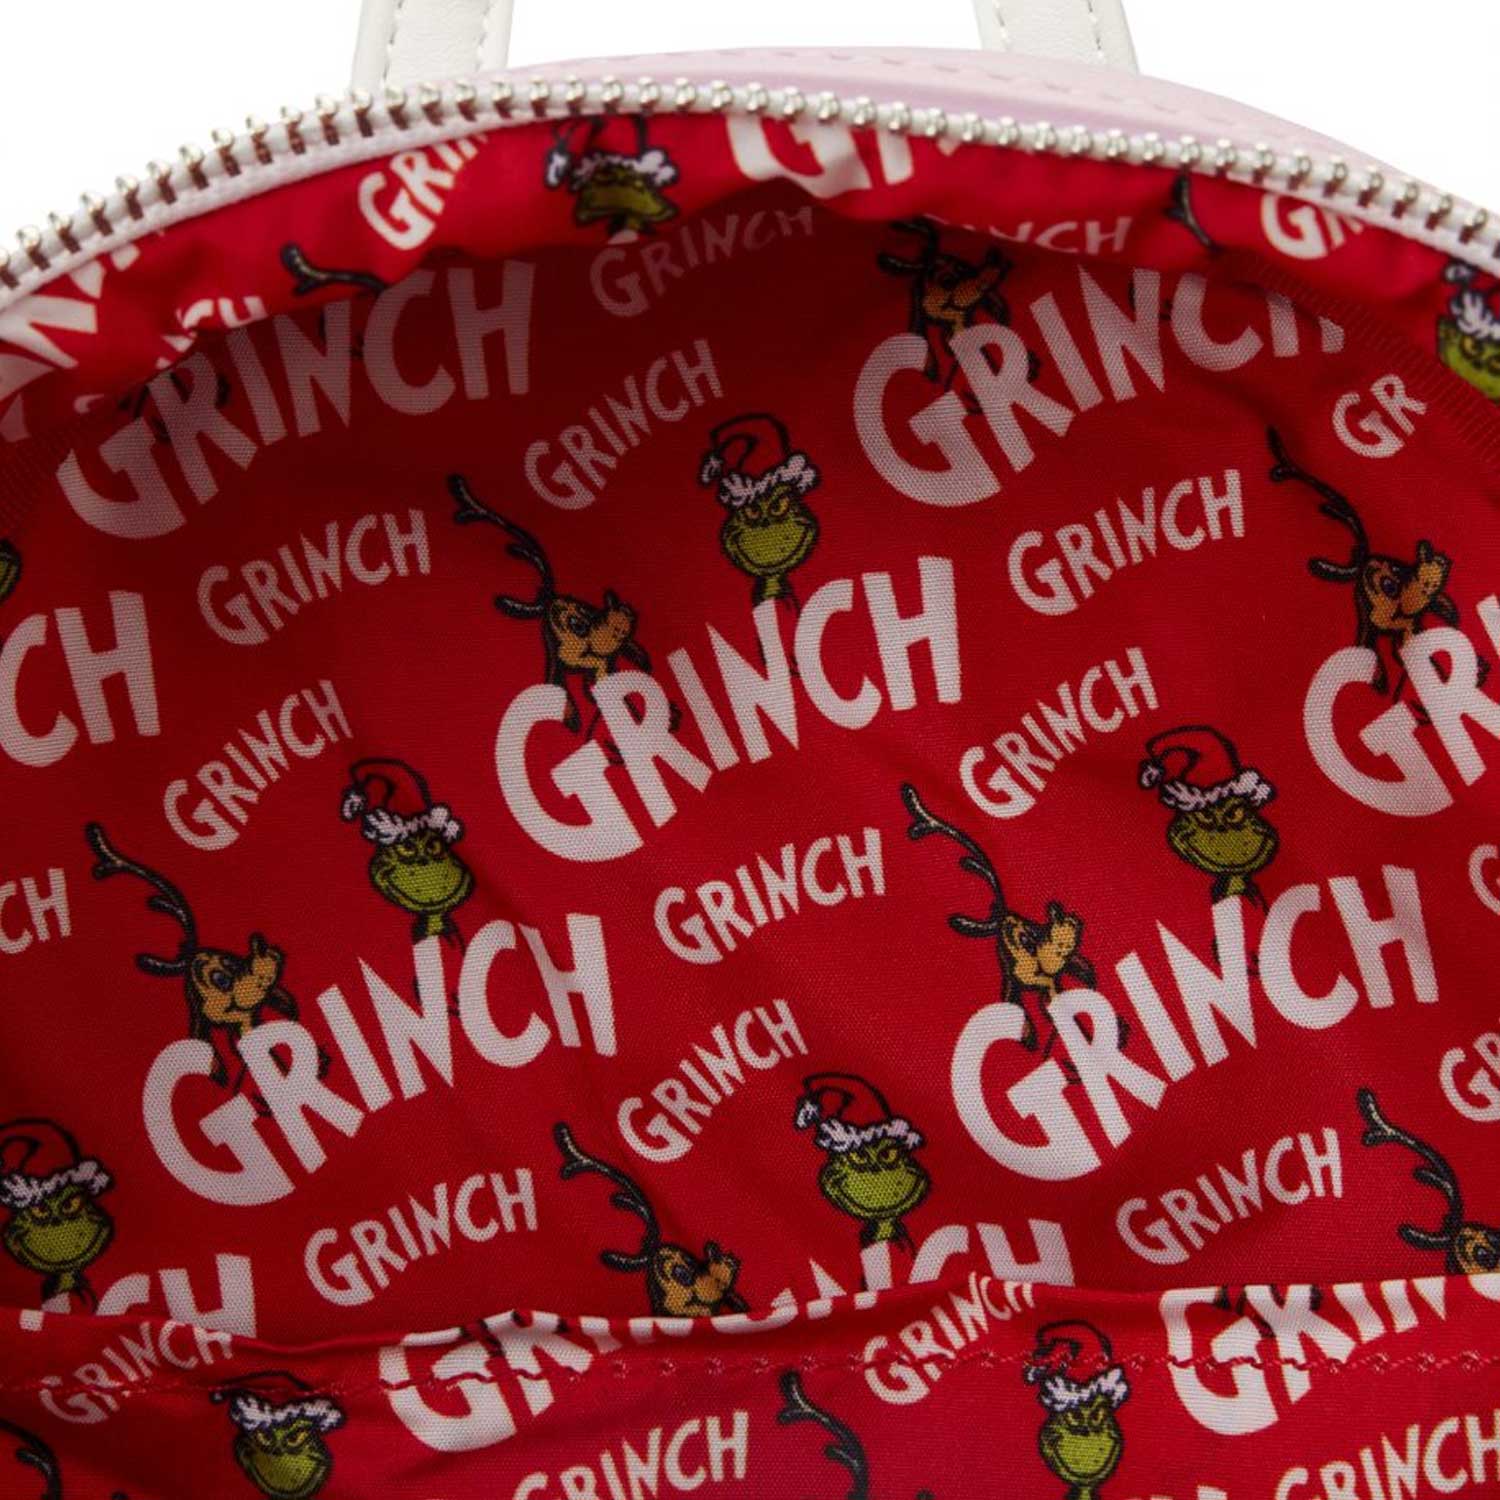 Loungefly x Dr Seuss Grinch Whoville Mini Backpack - GeekCore